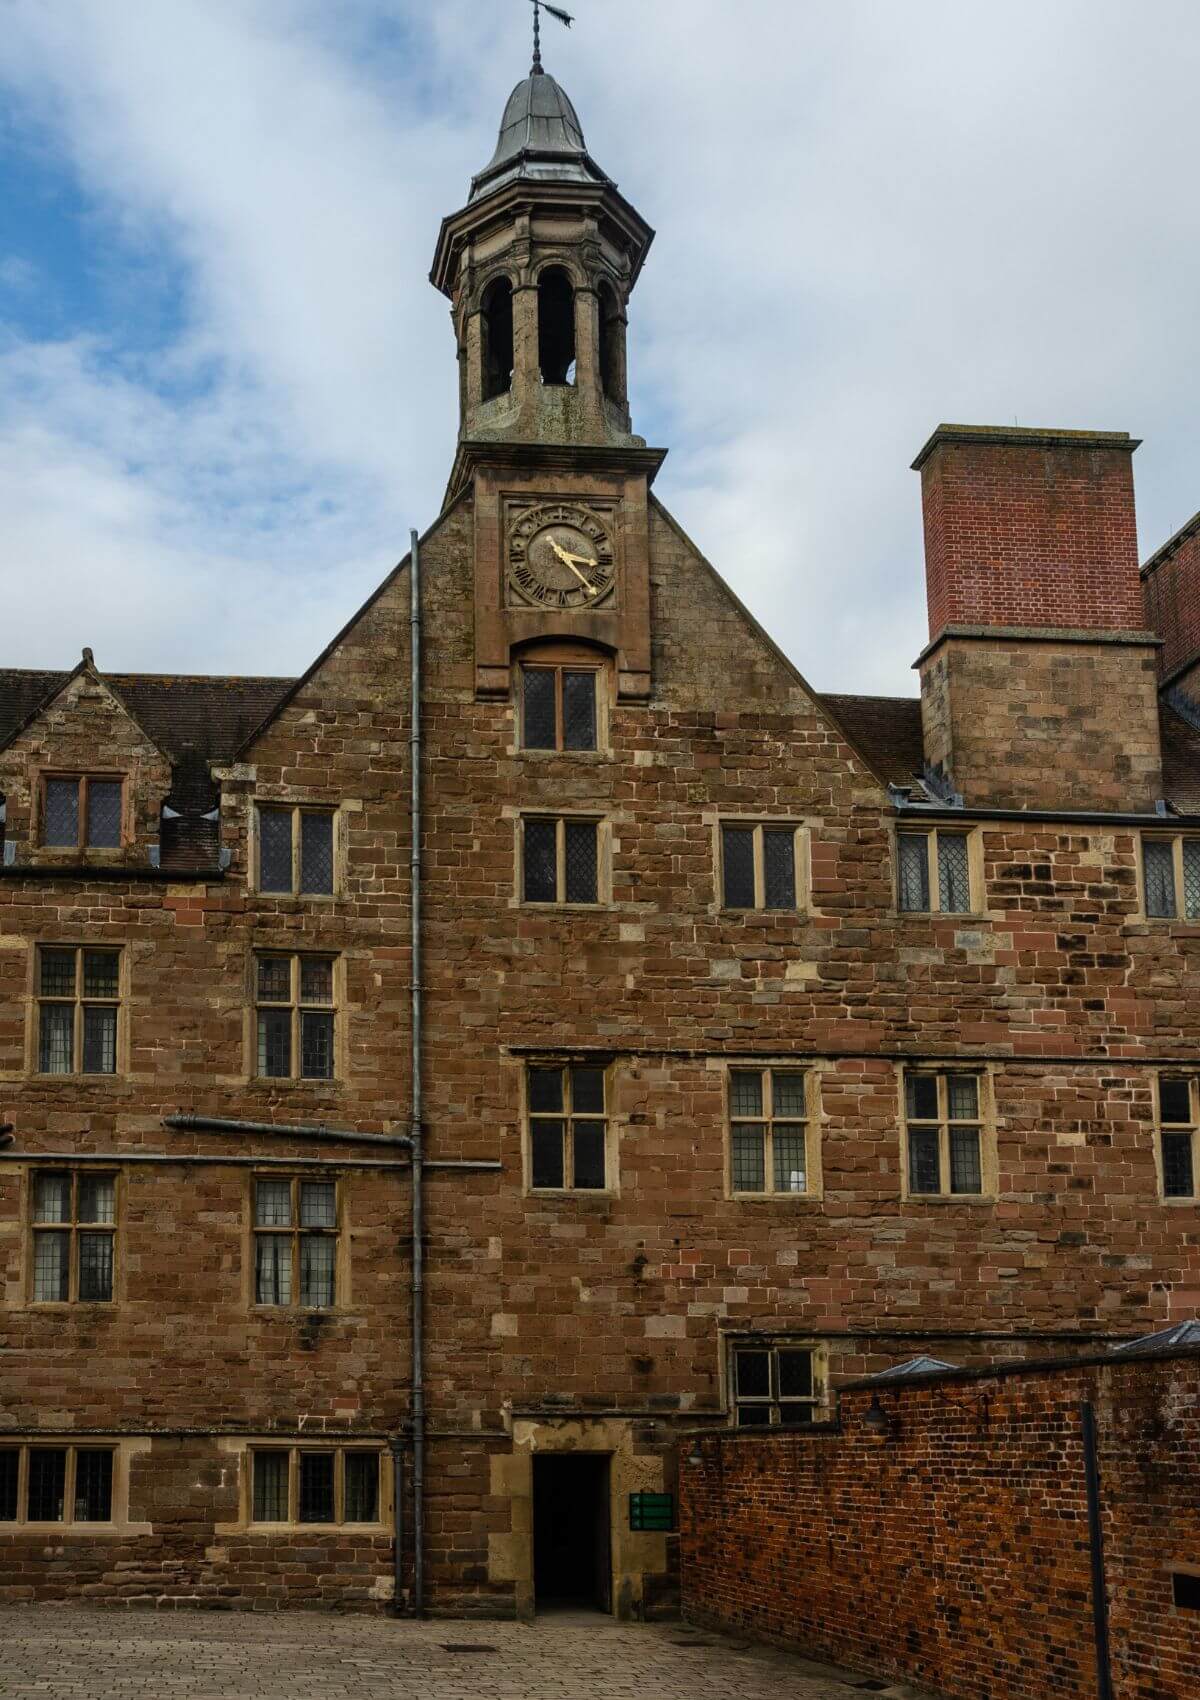 Visit Rufford Abbey on a day out in Nottinghamshire